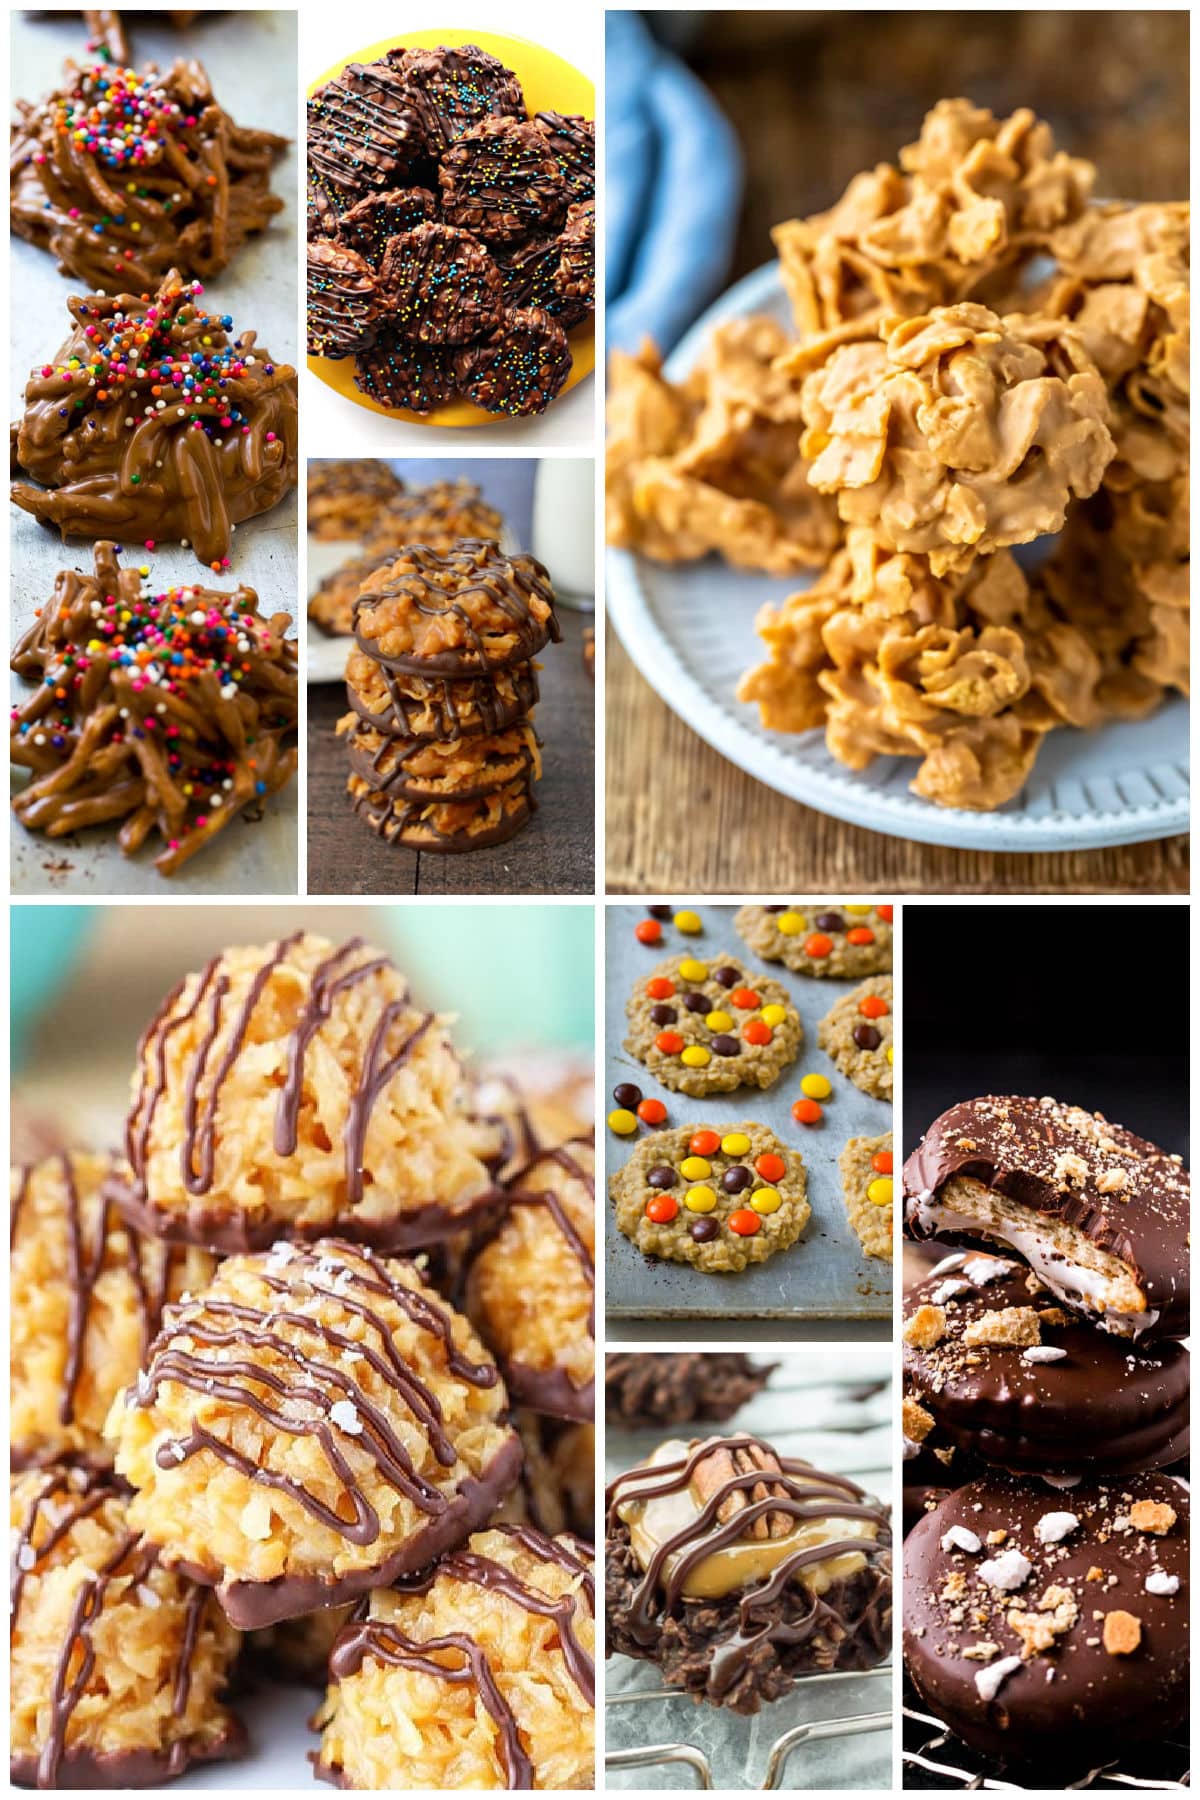 A group of desserts made on the stove like haystack cookies, peanut butter cookies and smores cookies.